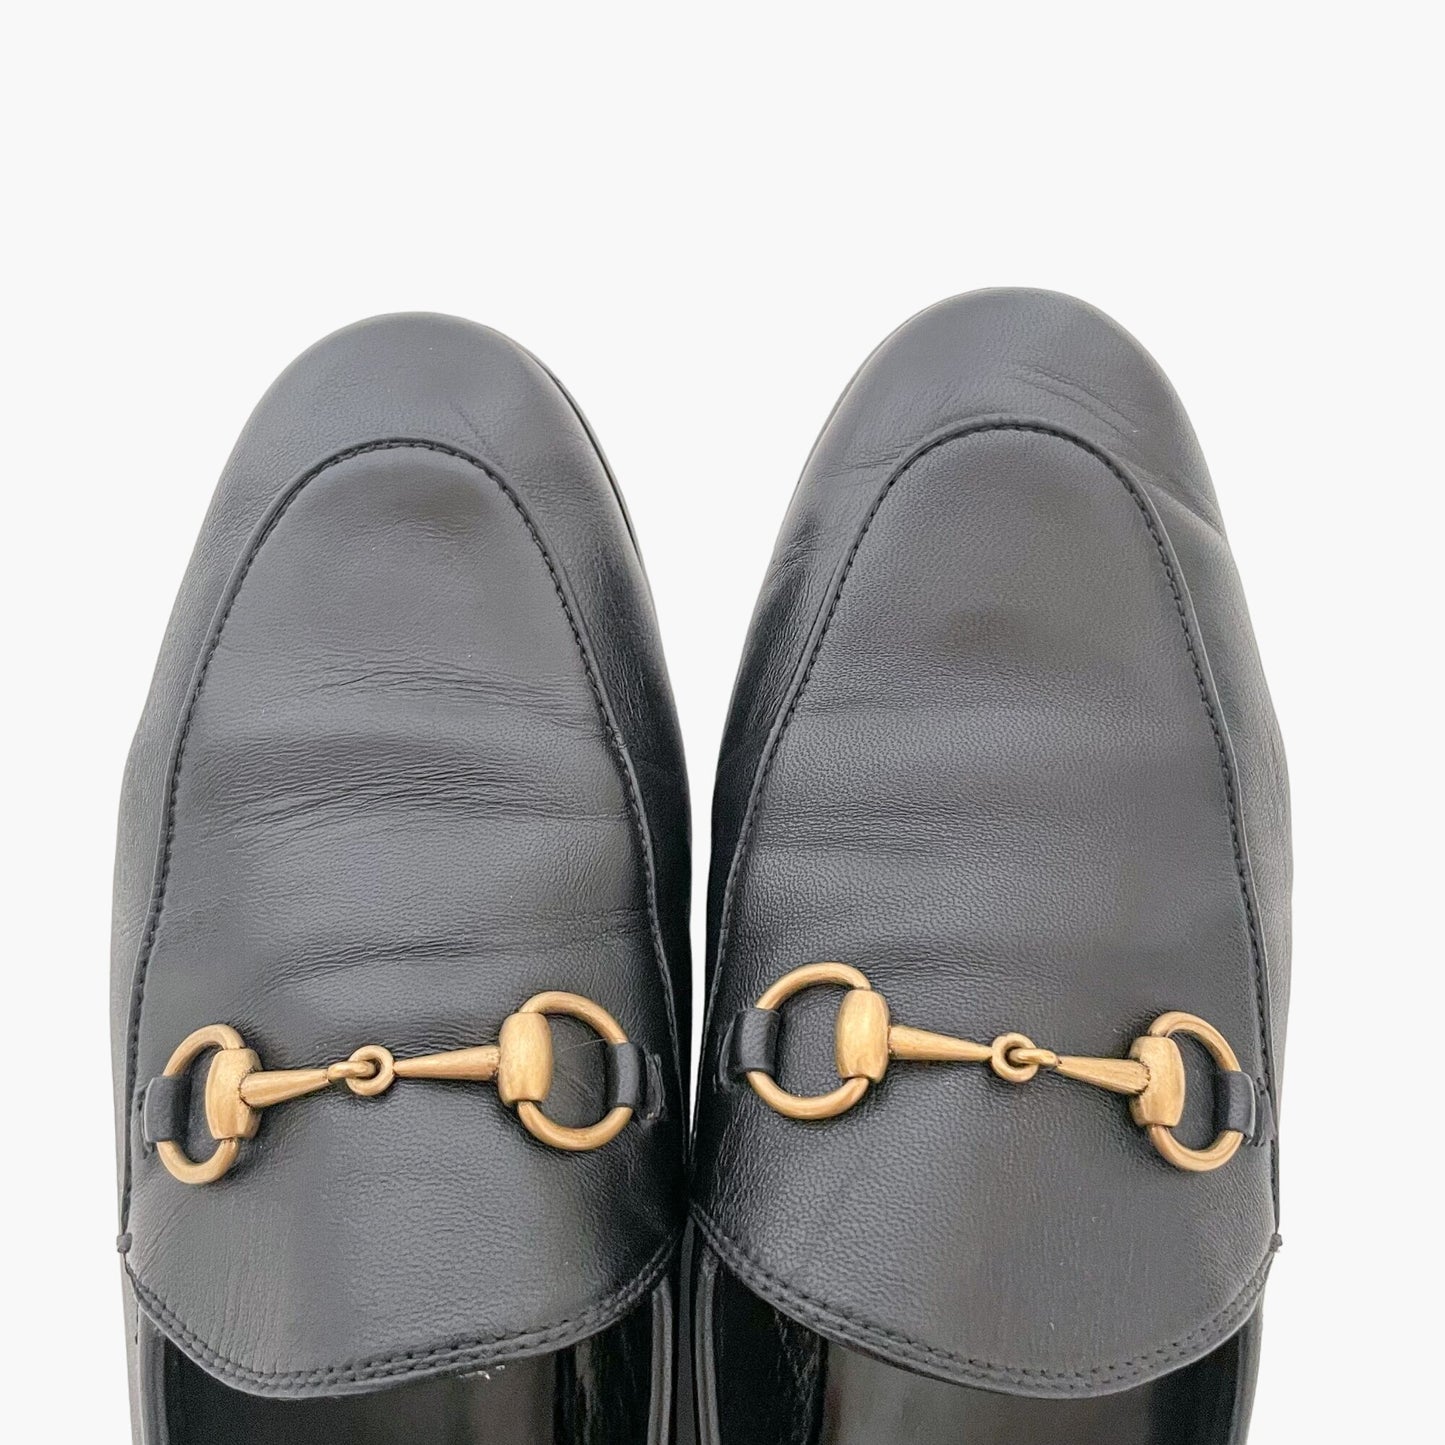 Gucci Brixton Horsebit Loafer in Black Leather Size 38.5